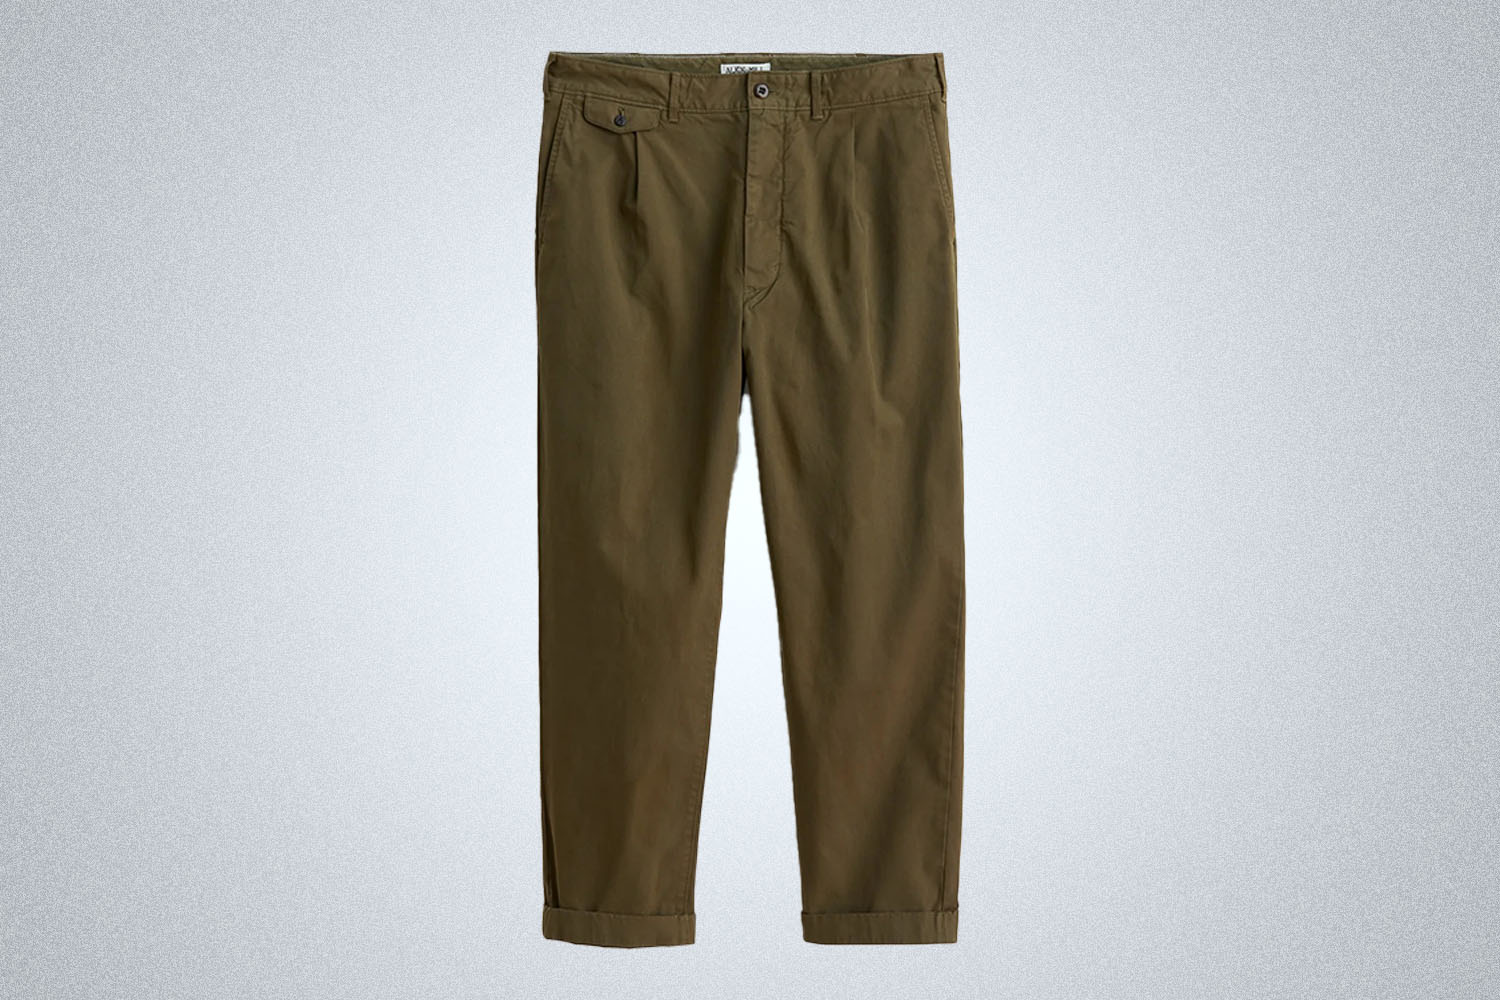 a pair of green Alex Mill chinos on a grey background